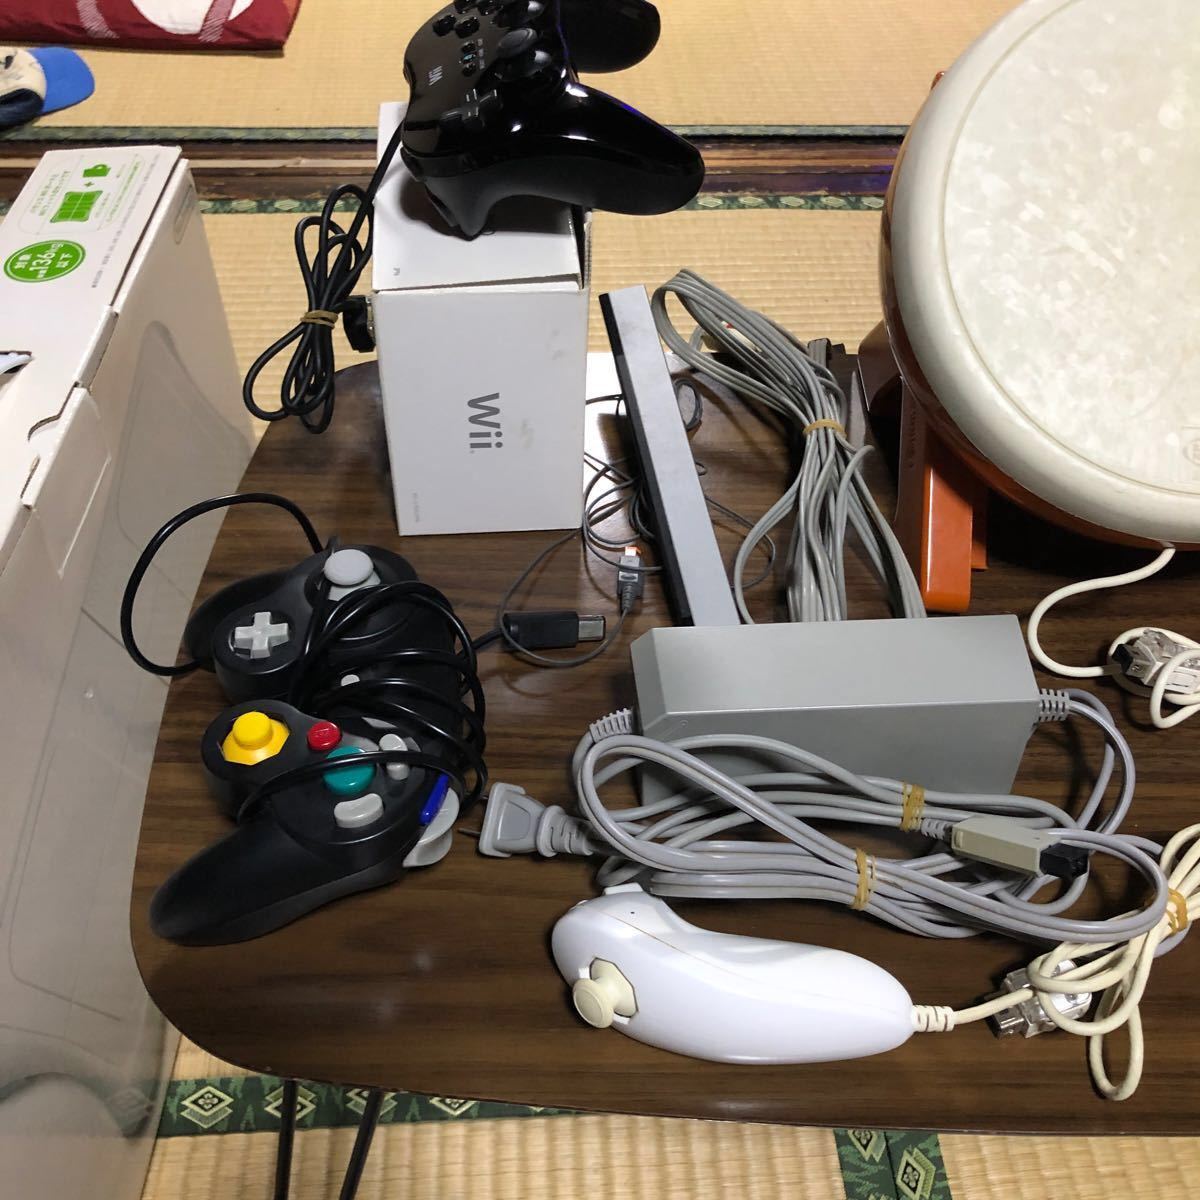 Wii本体　 リモコン、太鼓の達人 、ソフト 、周辺機器セット